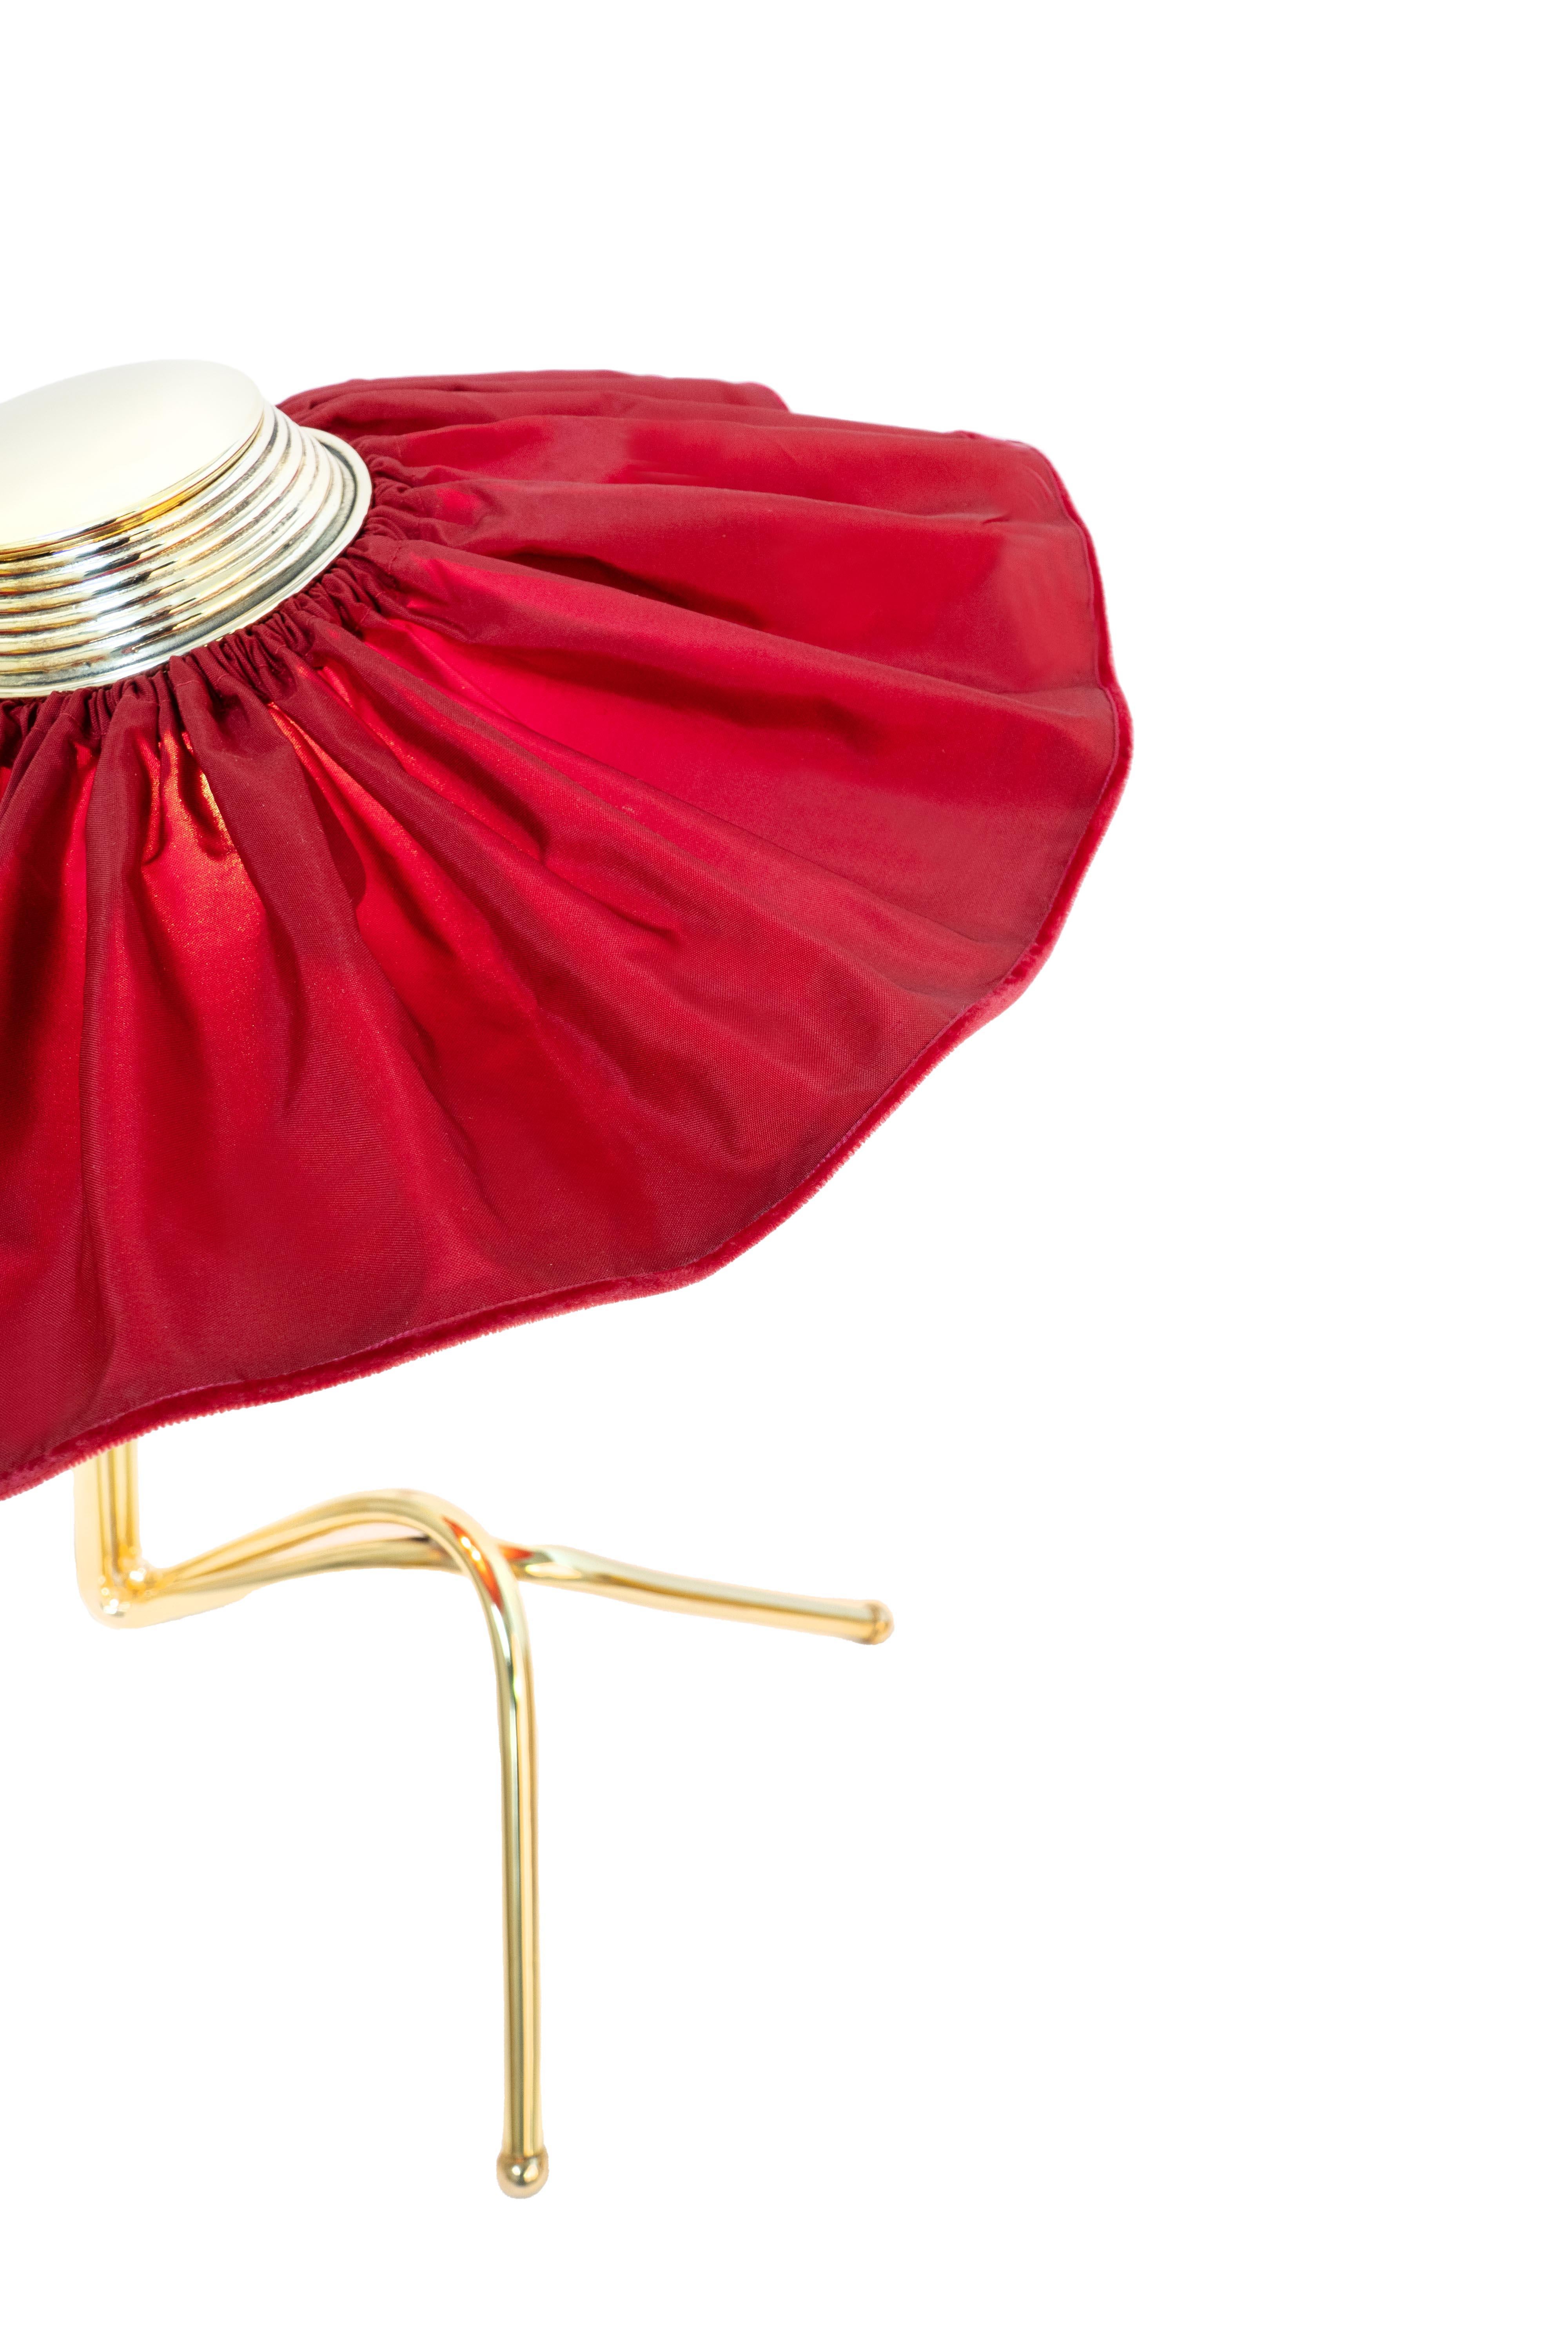 Modern Freevolle Sculpture Table Lamp, cast melted Brass Body, red passion Taffeta